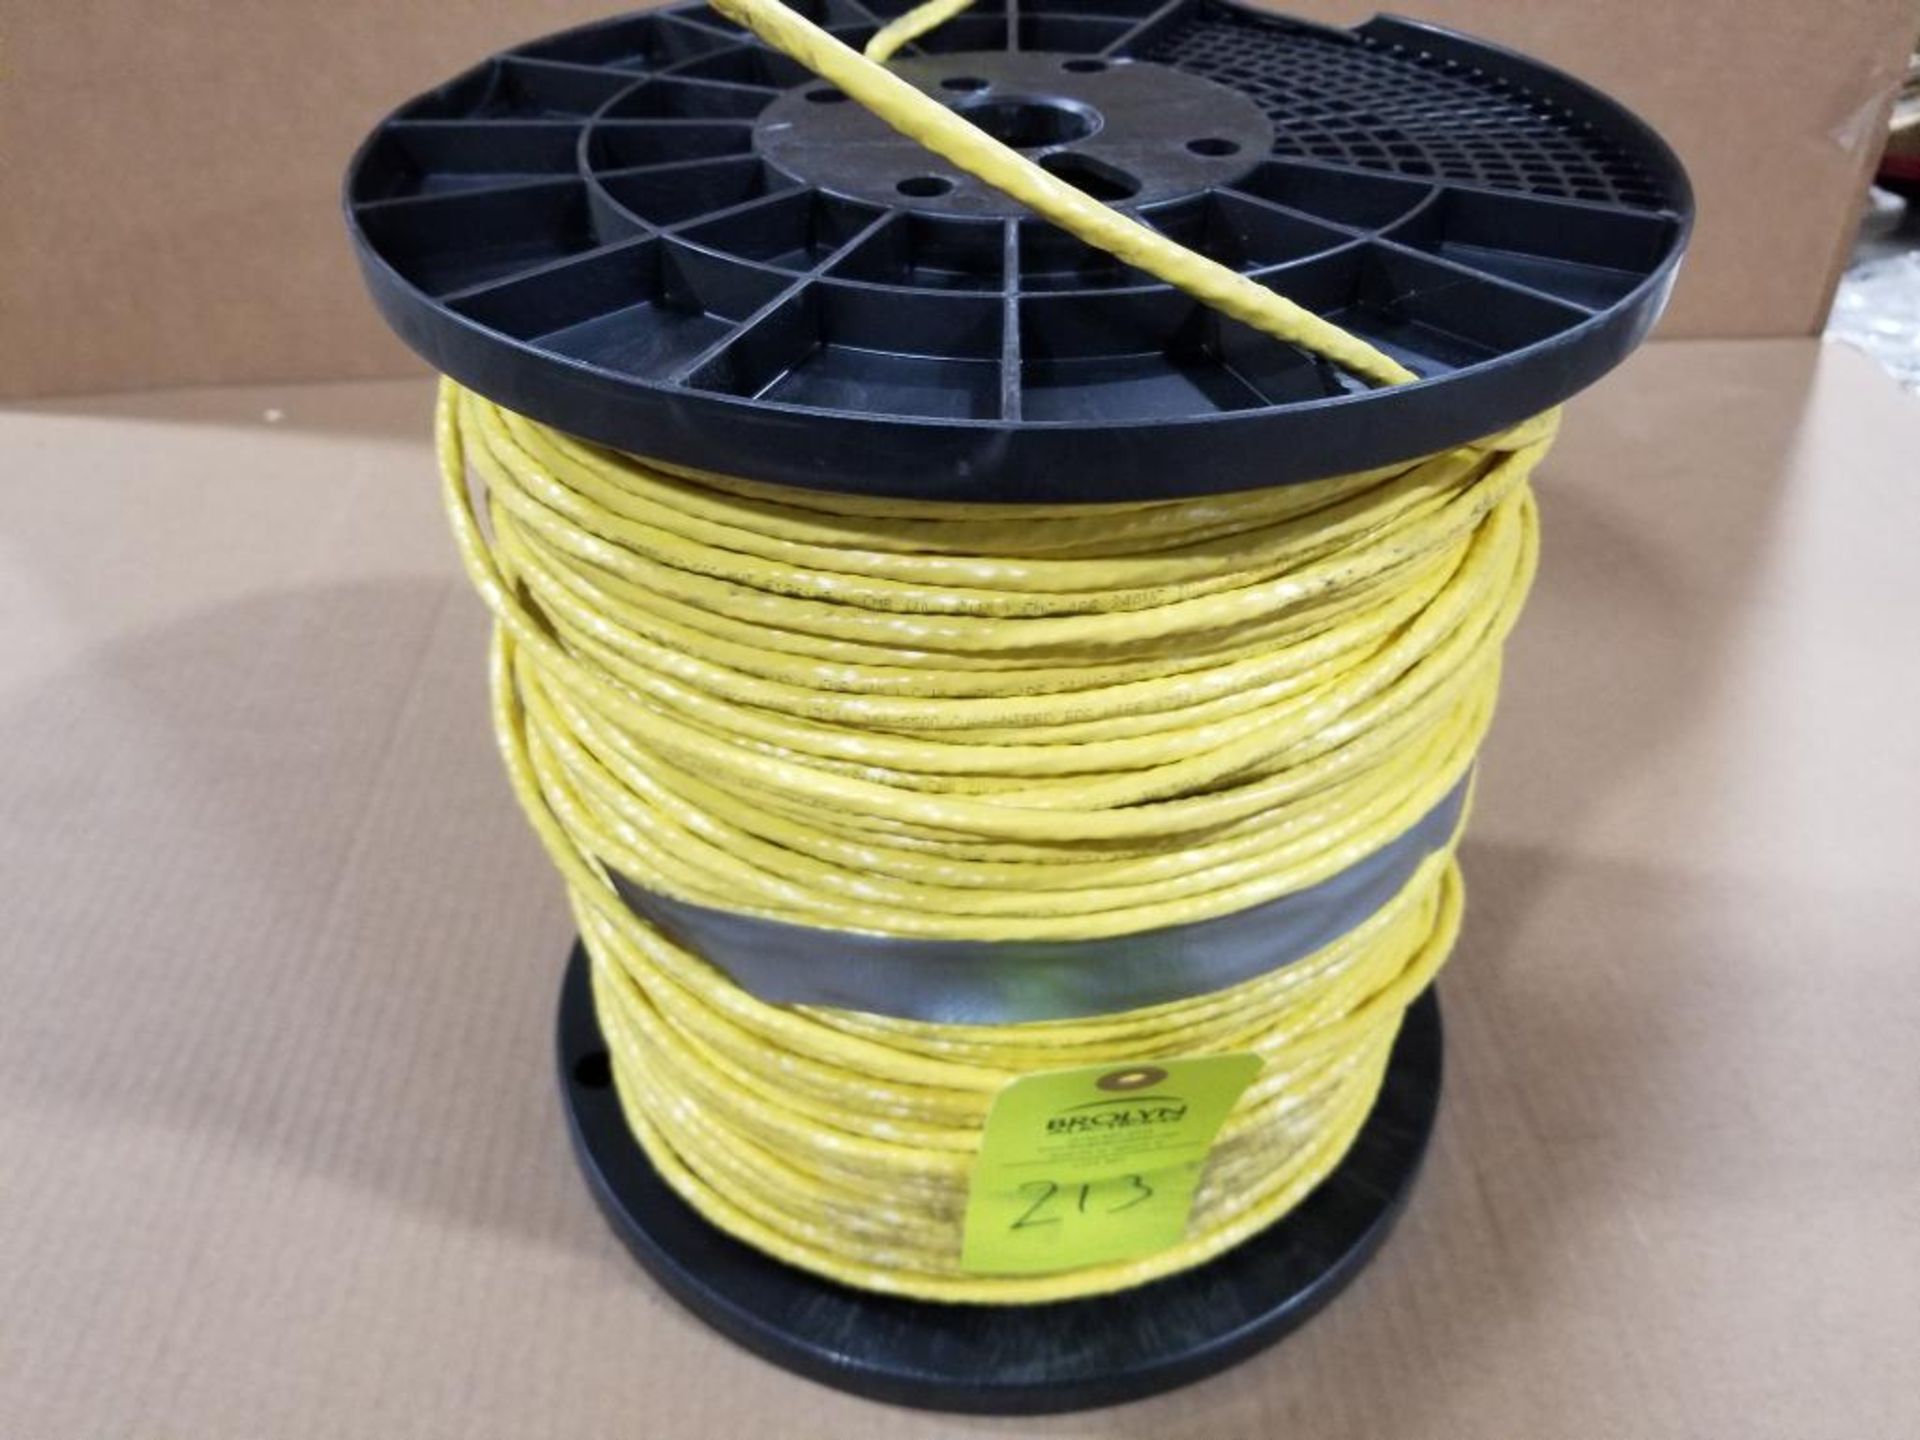 Large roll of wire.